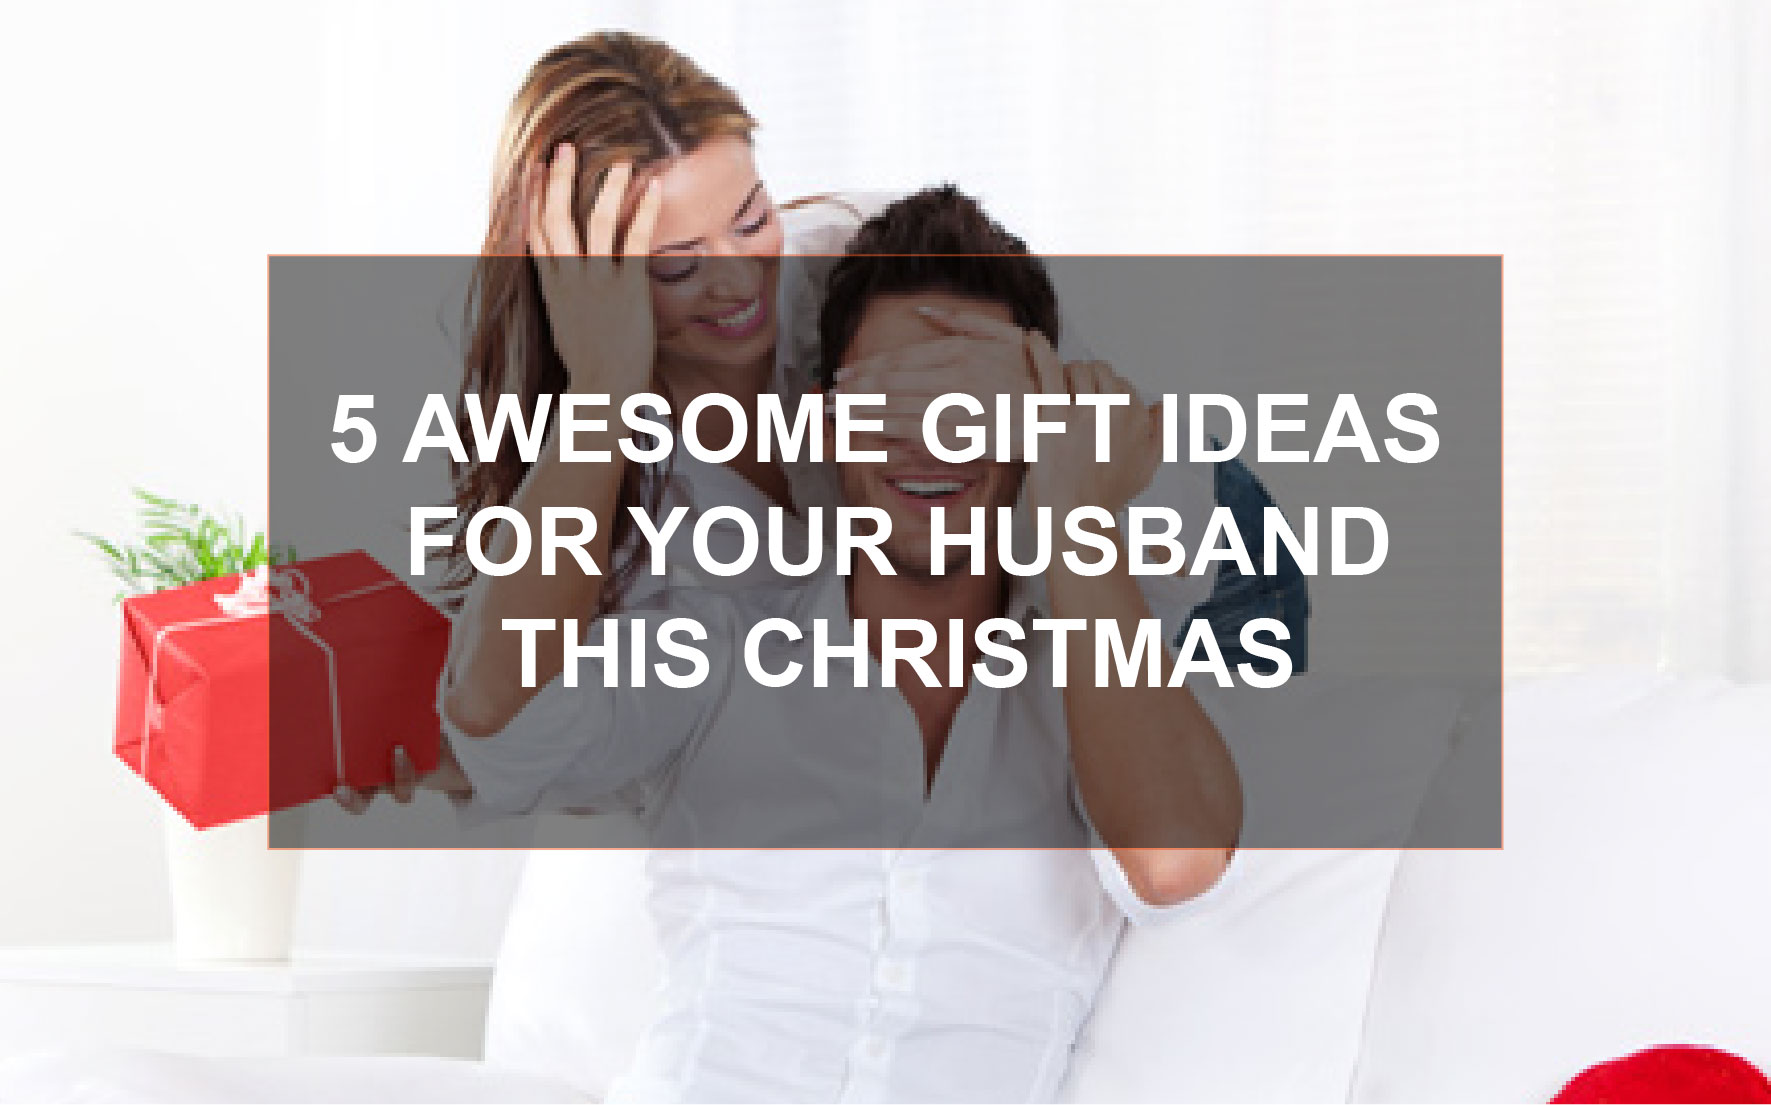 5 Awesome gift ideas for your husband in this Christmas